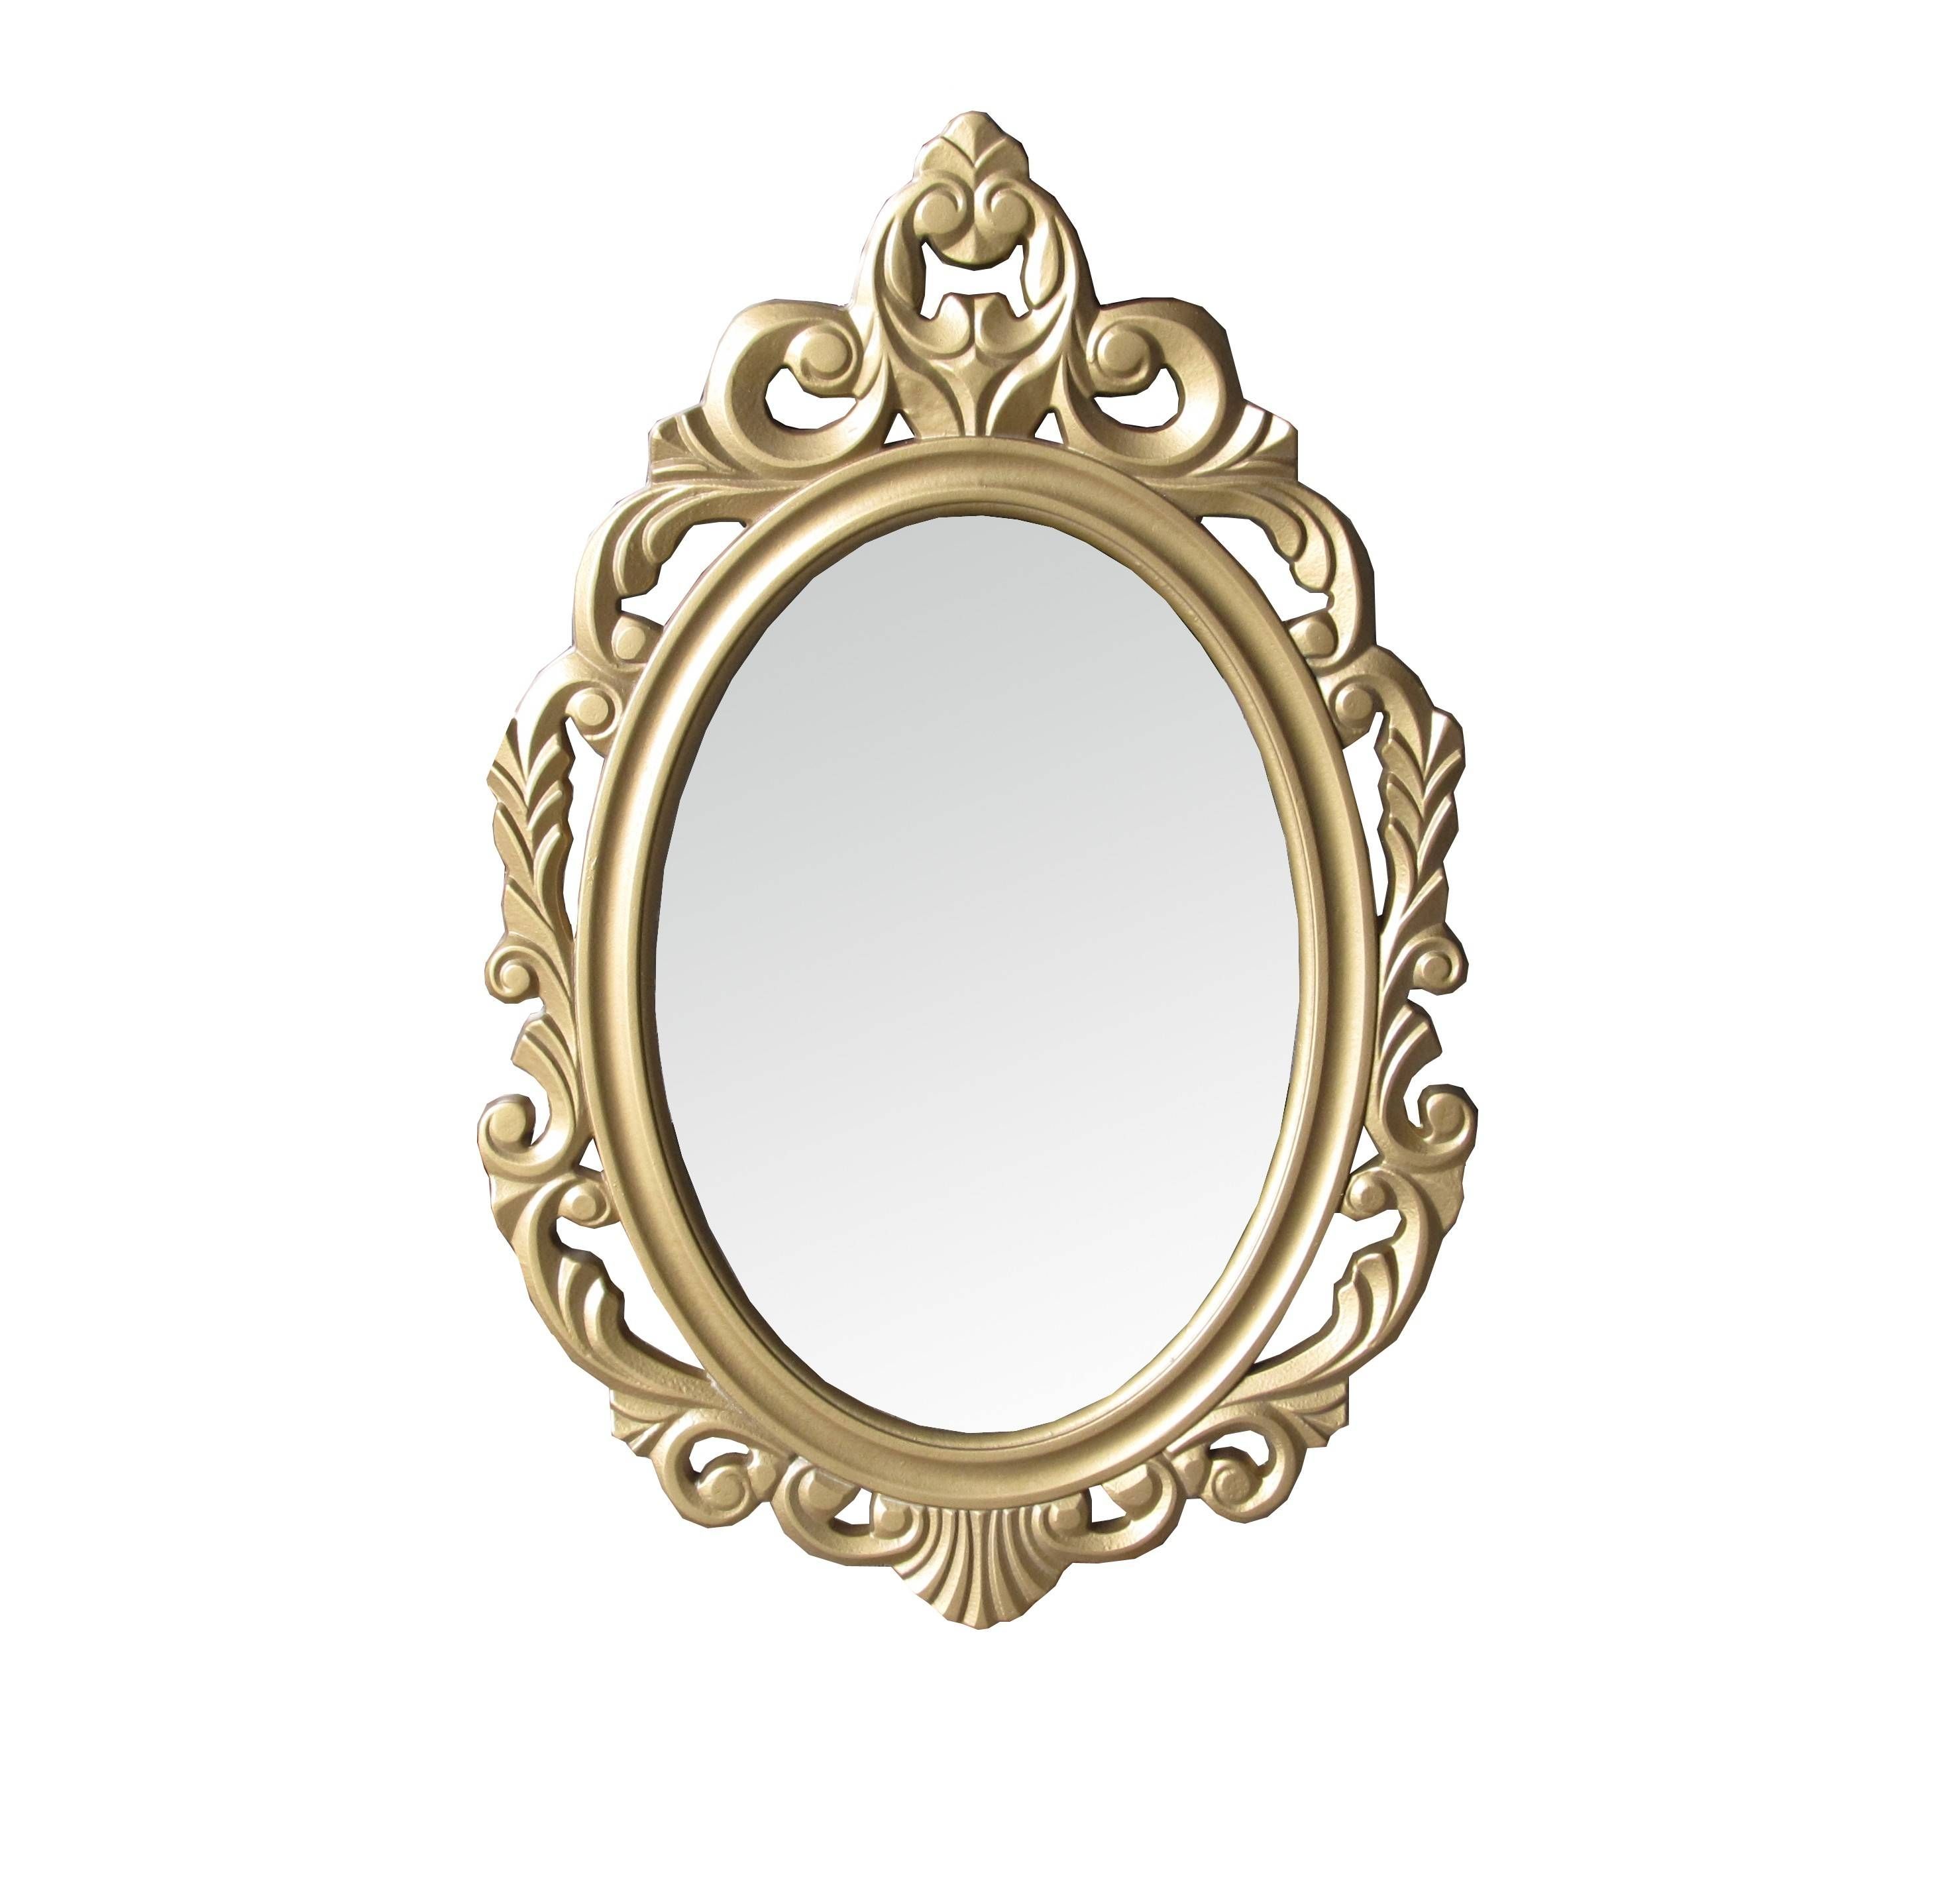 Interior & Decoration: Shabby Chic Ornate Gold Oval Wall Mirror For Gold Ornate Mirrors (View 25 of 25)